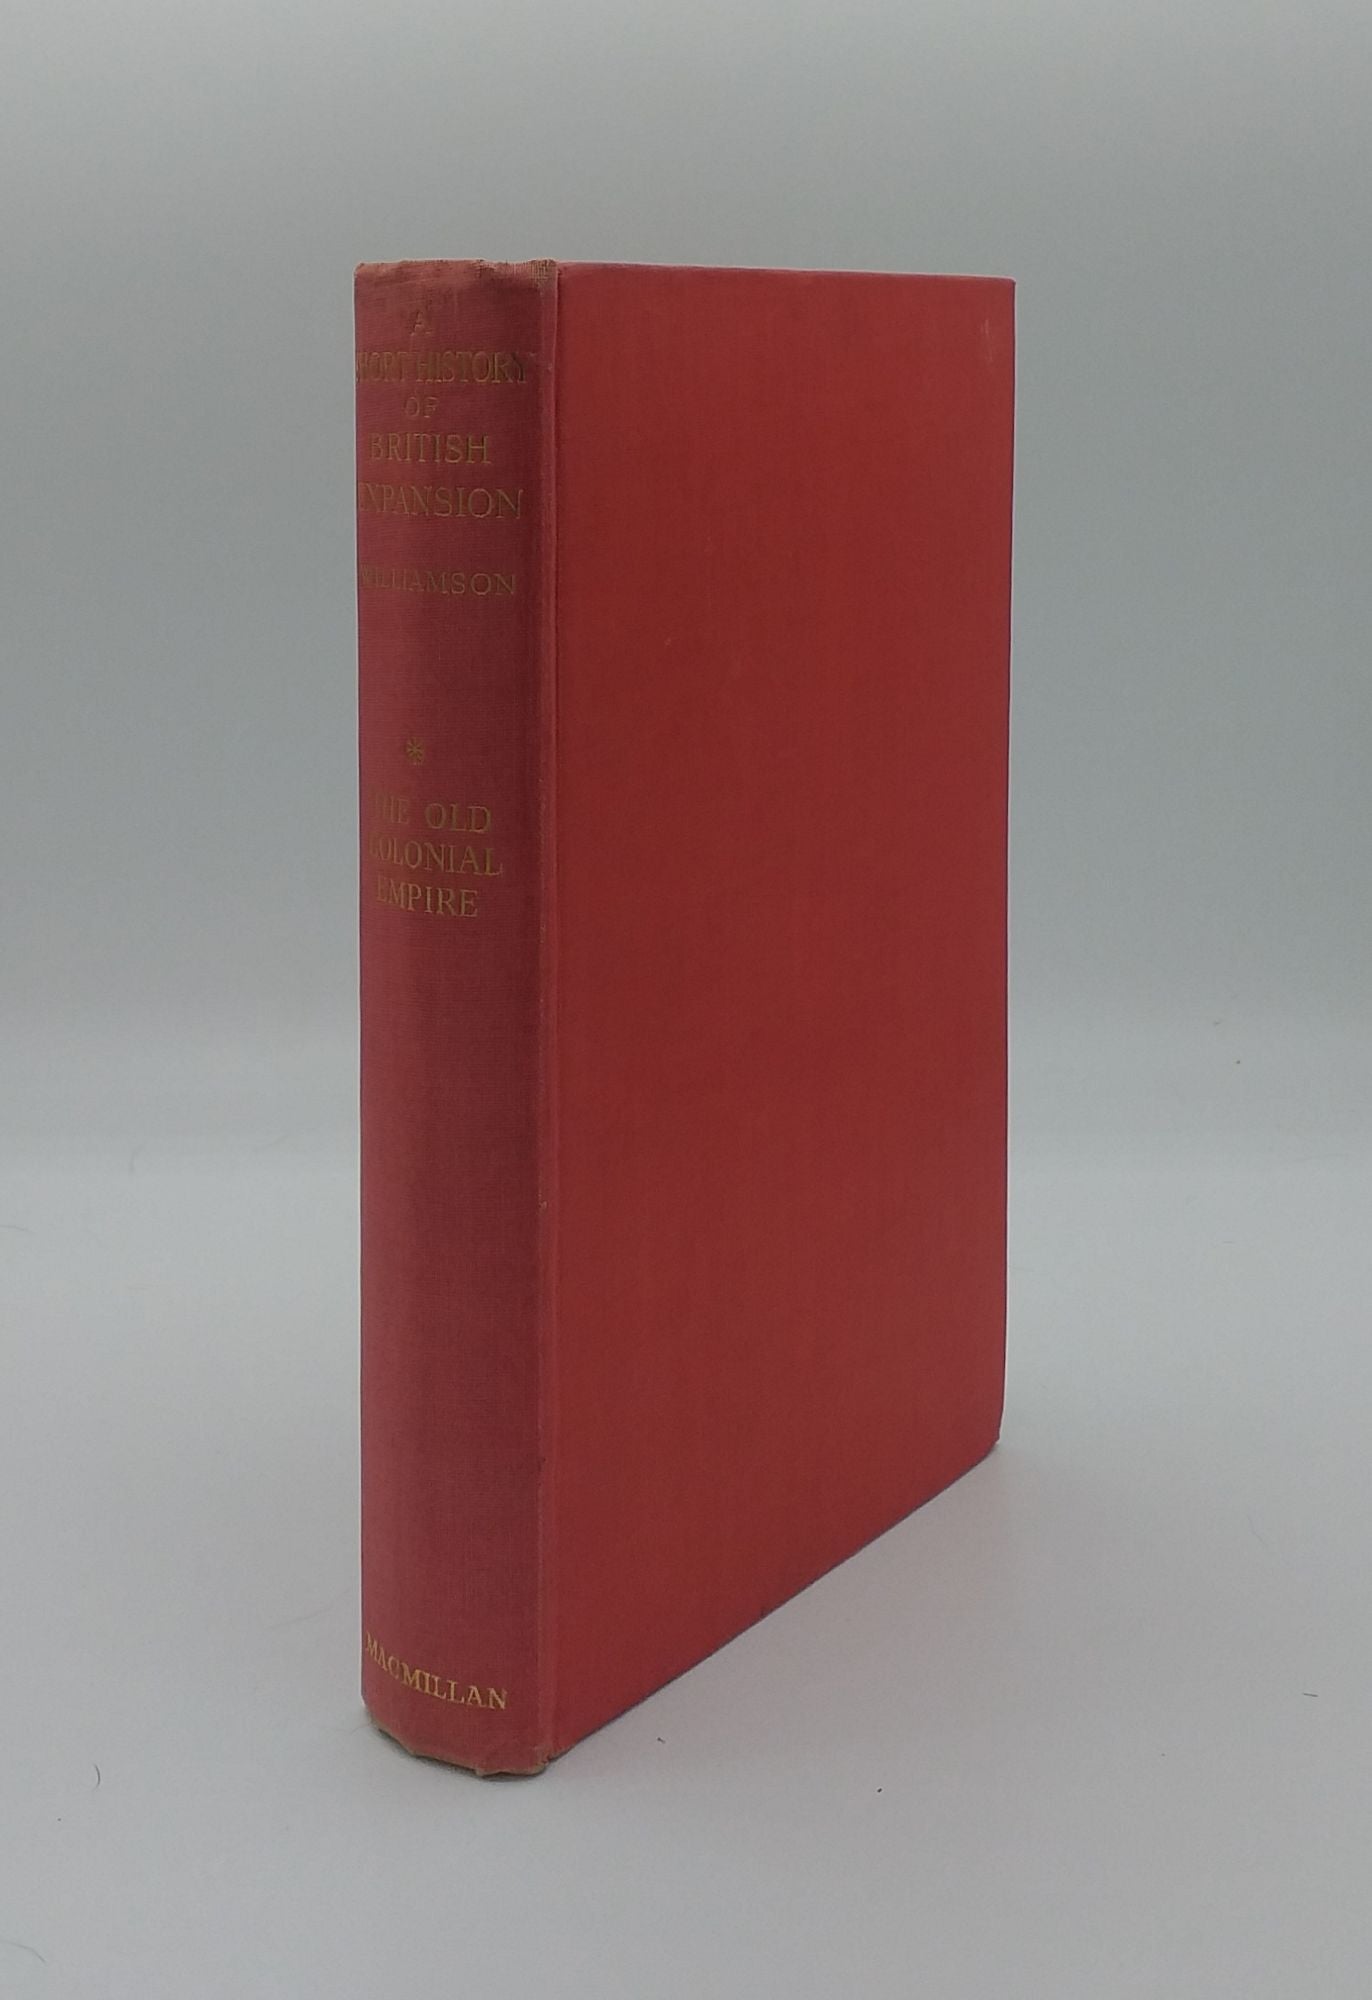 WILLIAMSON James A. - A Short History of British Expansion the Old Colonial Empire